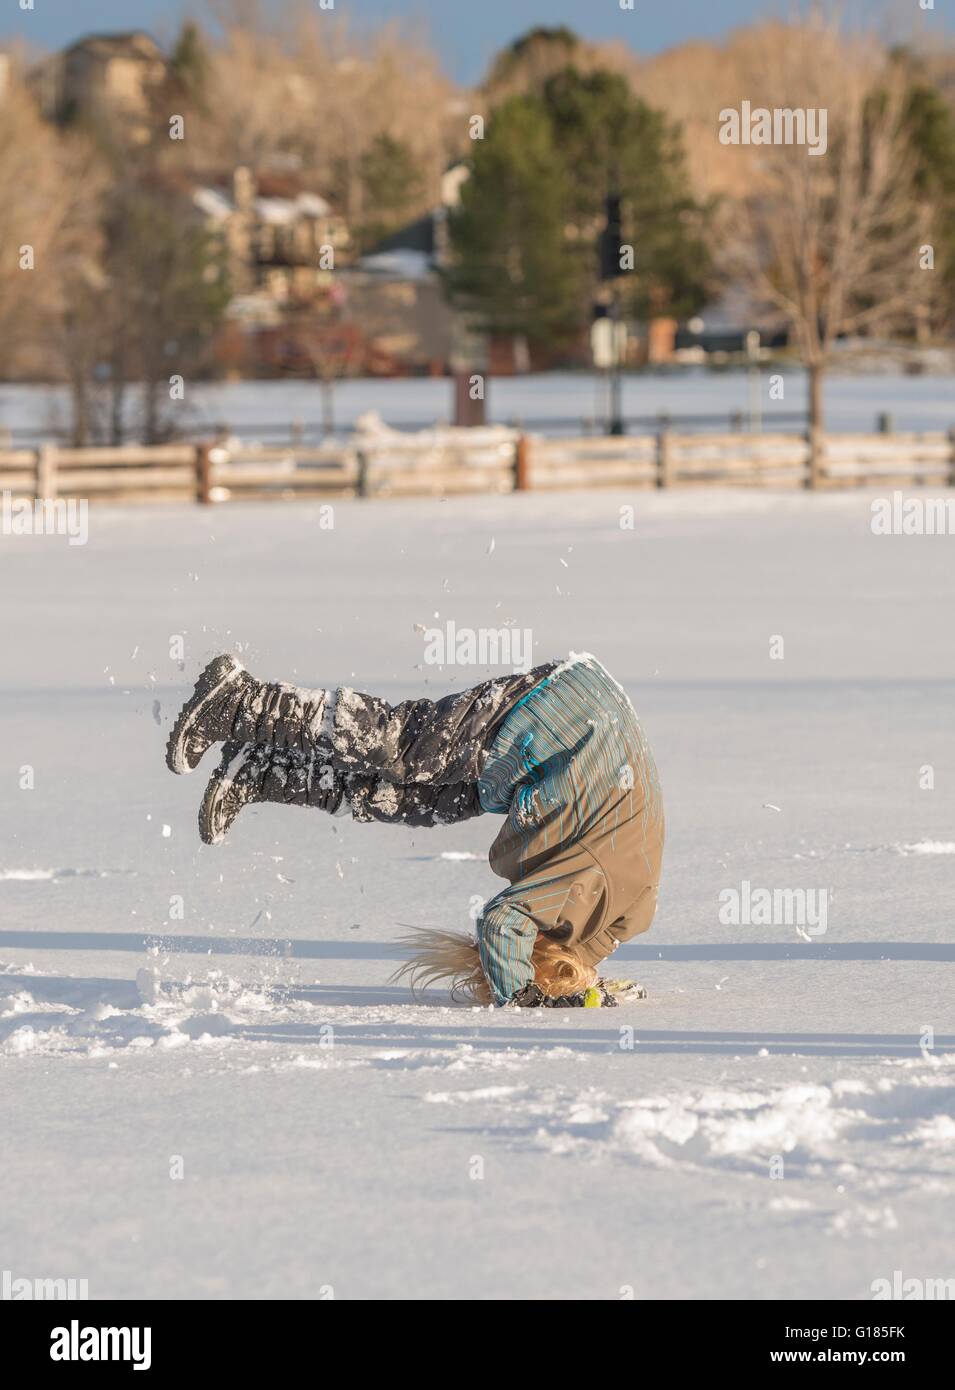 Child doing somersault in snow Stock Photo